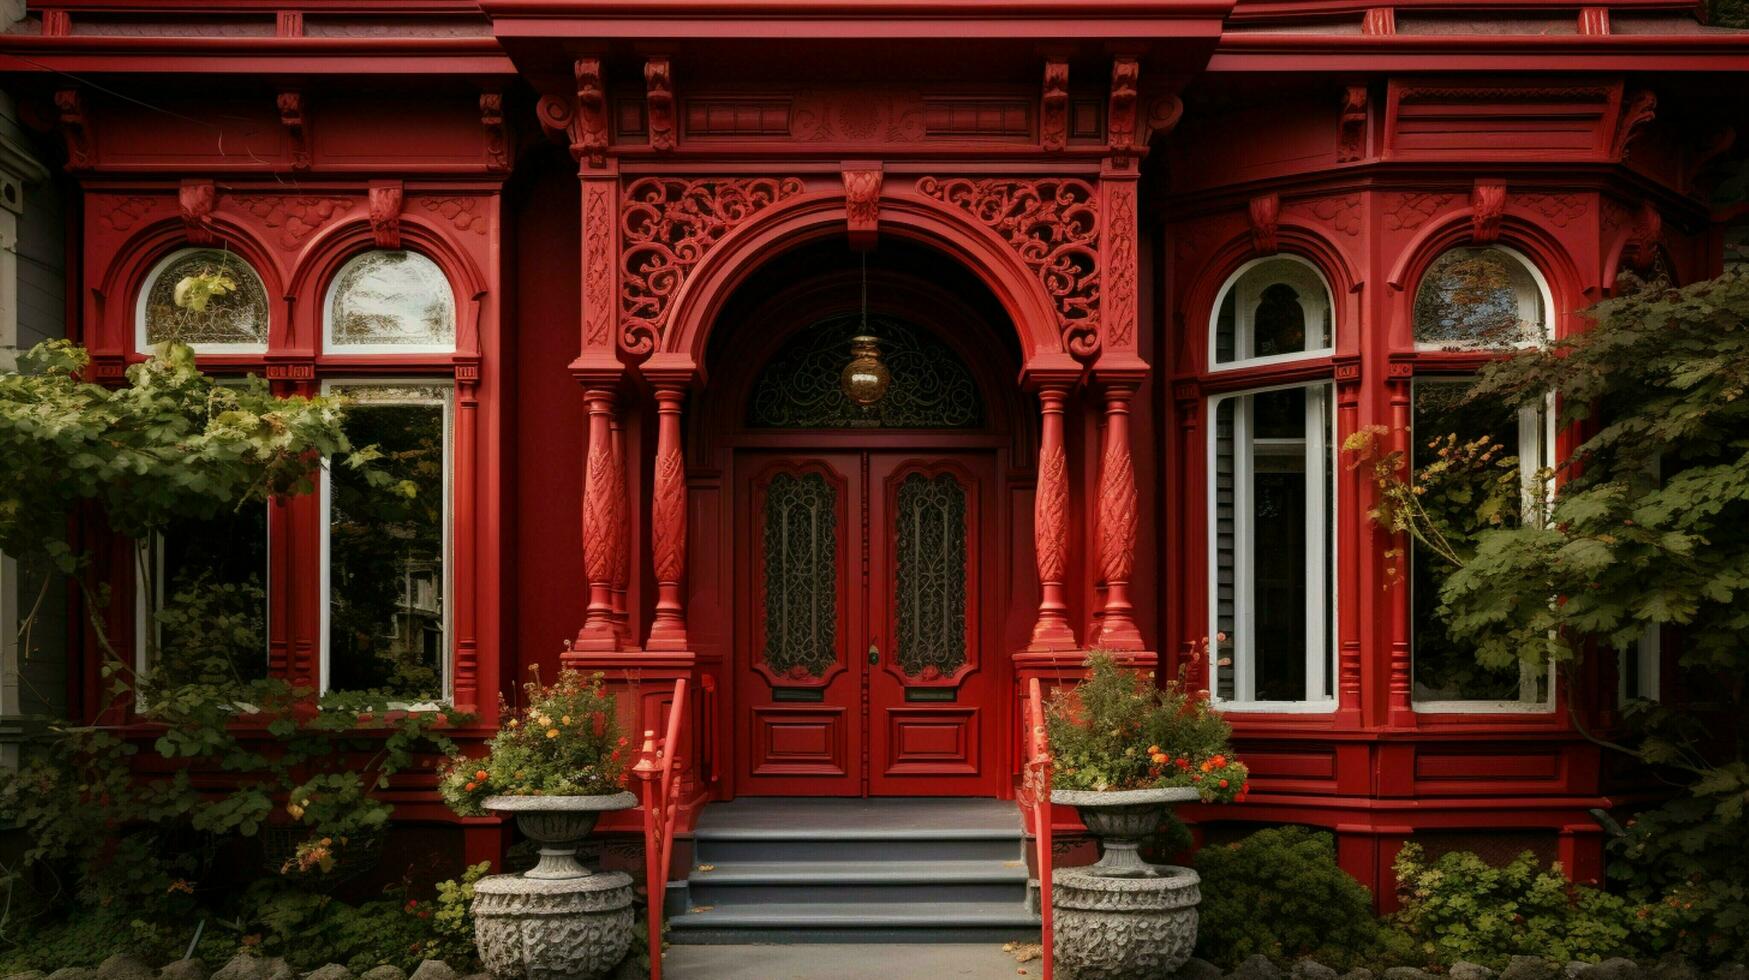 red beauty house front facade photo